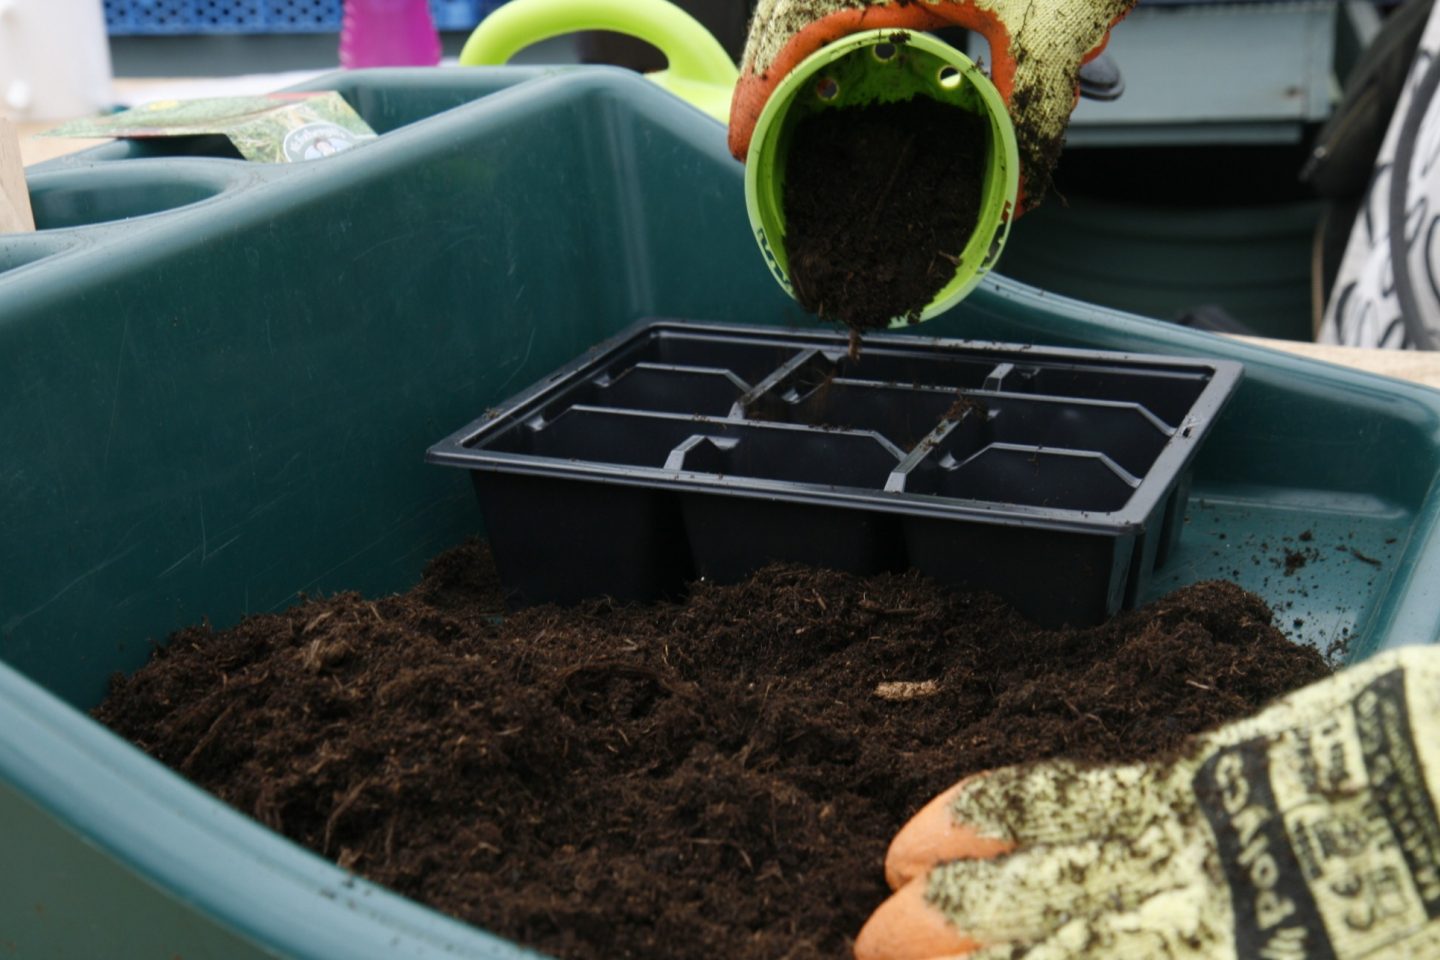 Compost being added into tray using a small flowerpot